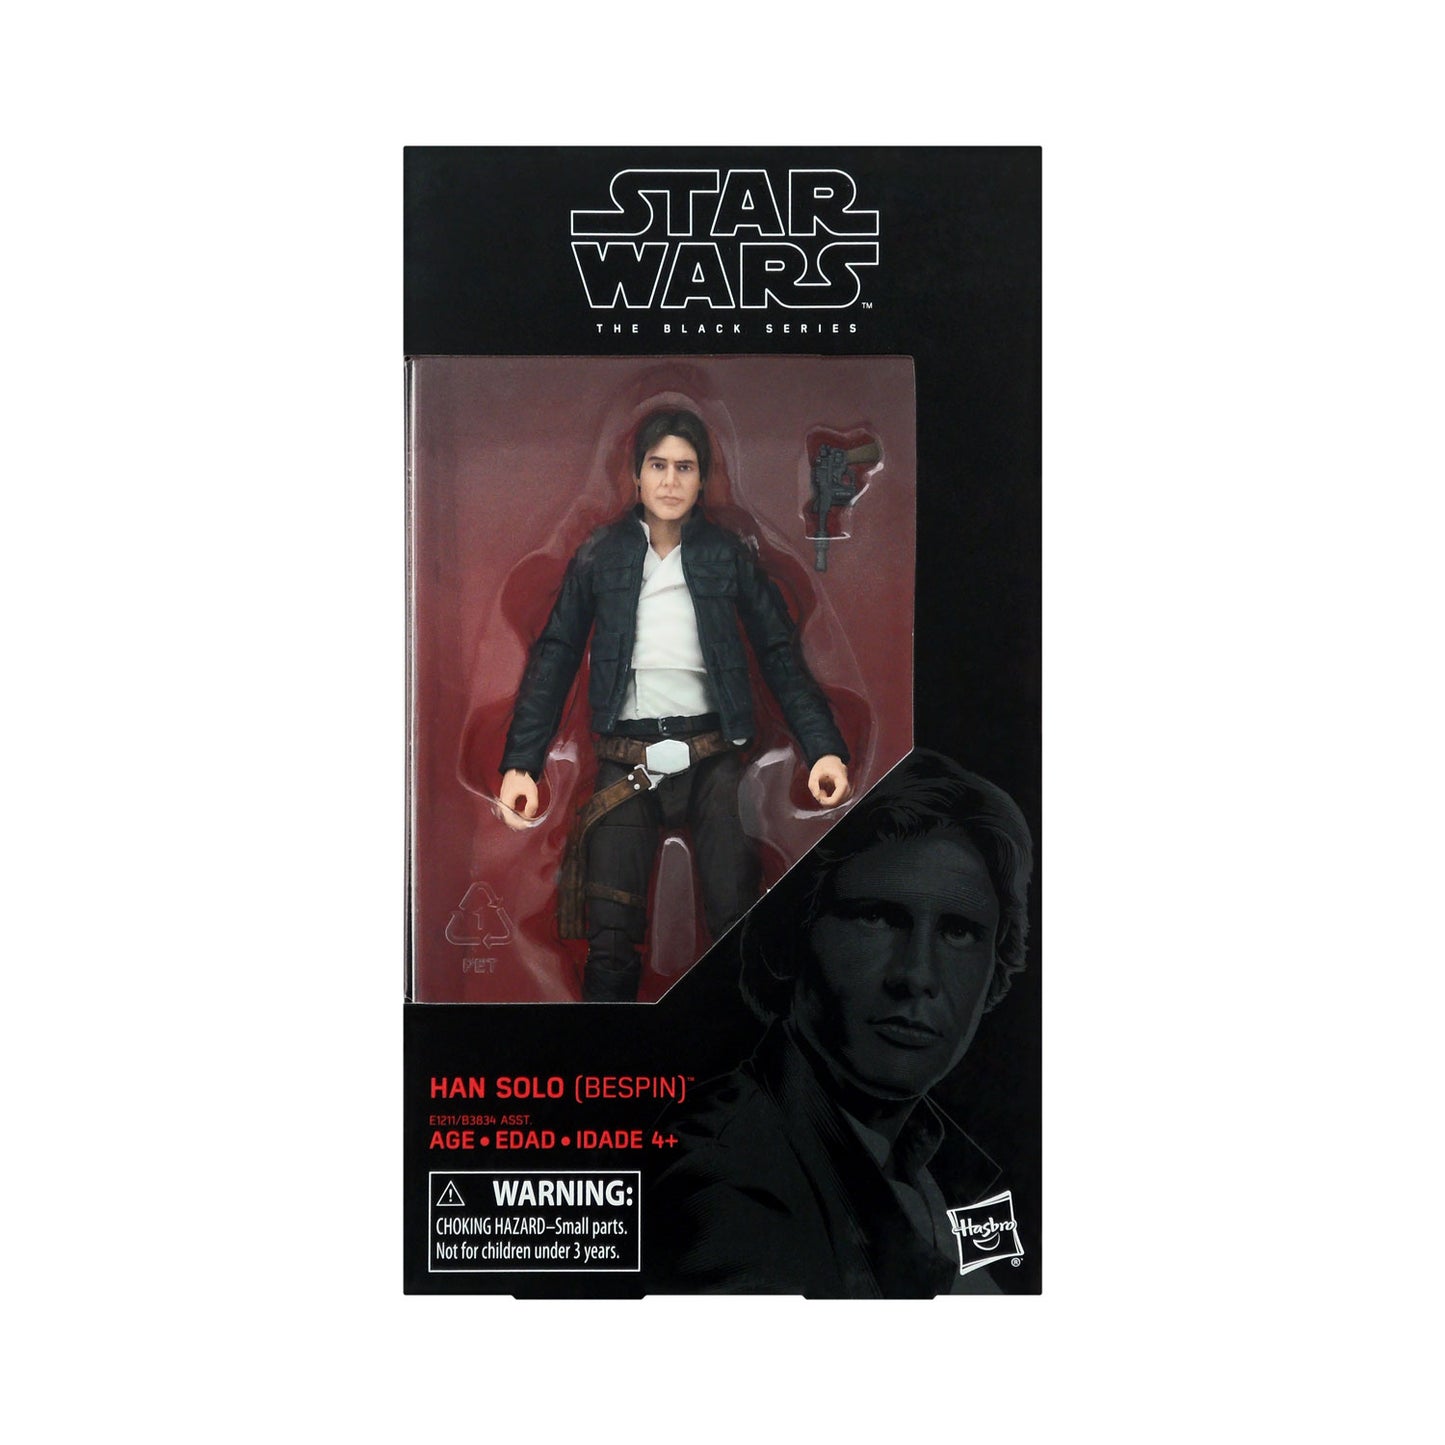 Star Wars: The Black Series Han Solo (Bespin)